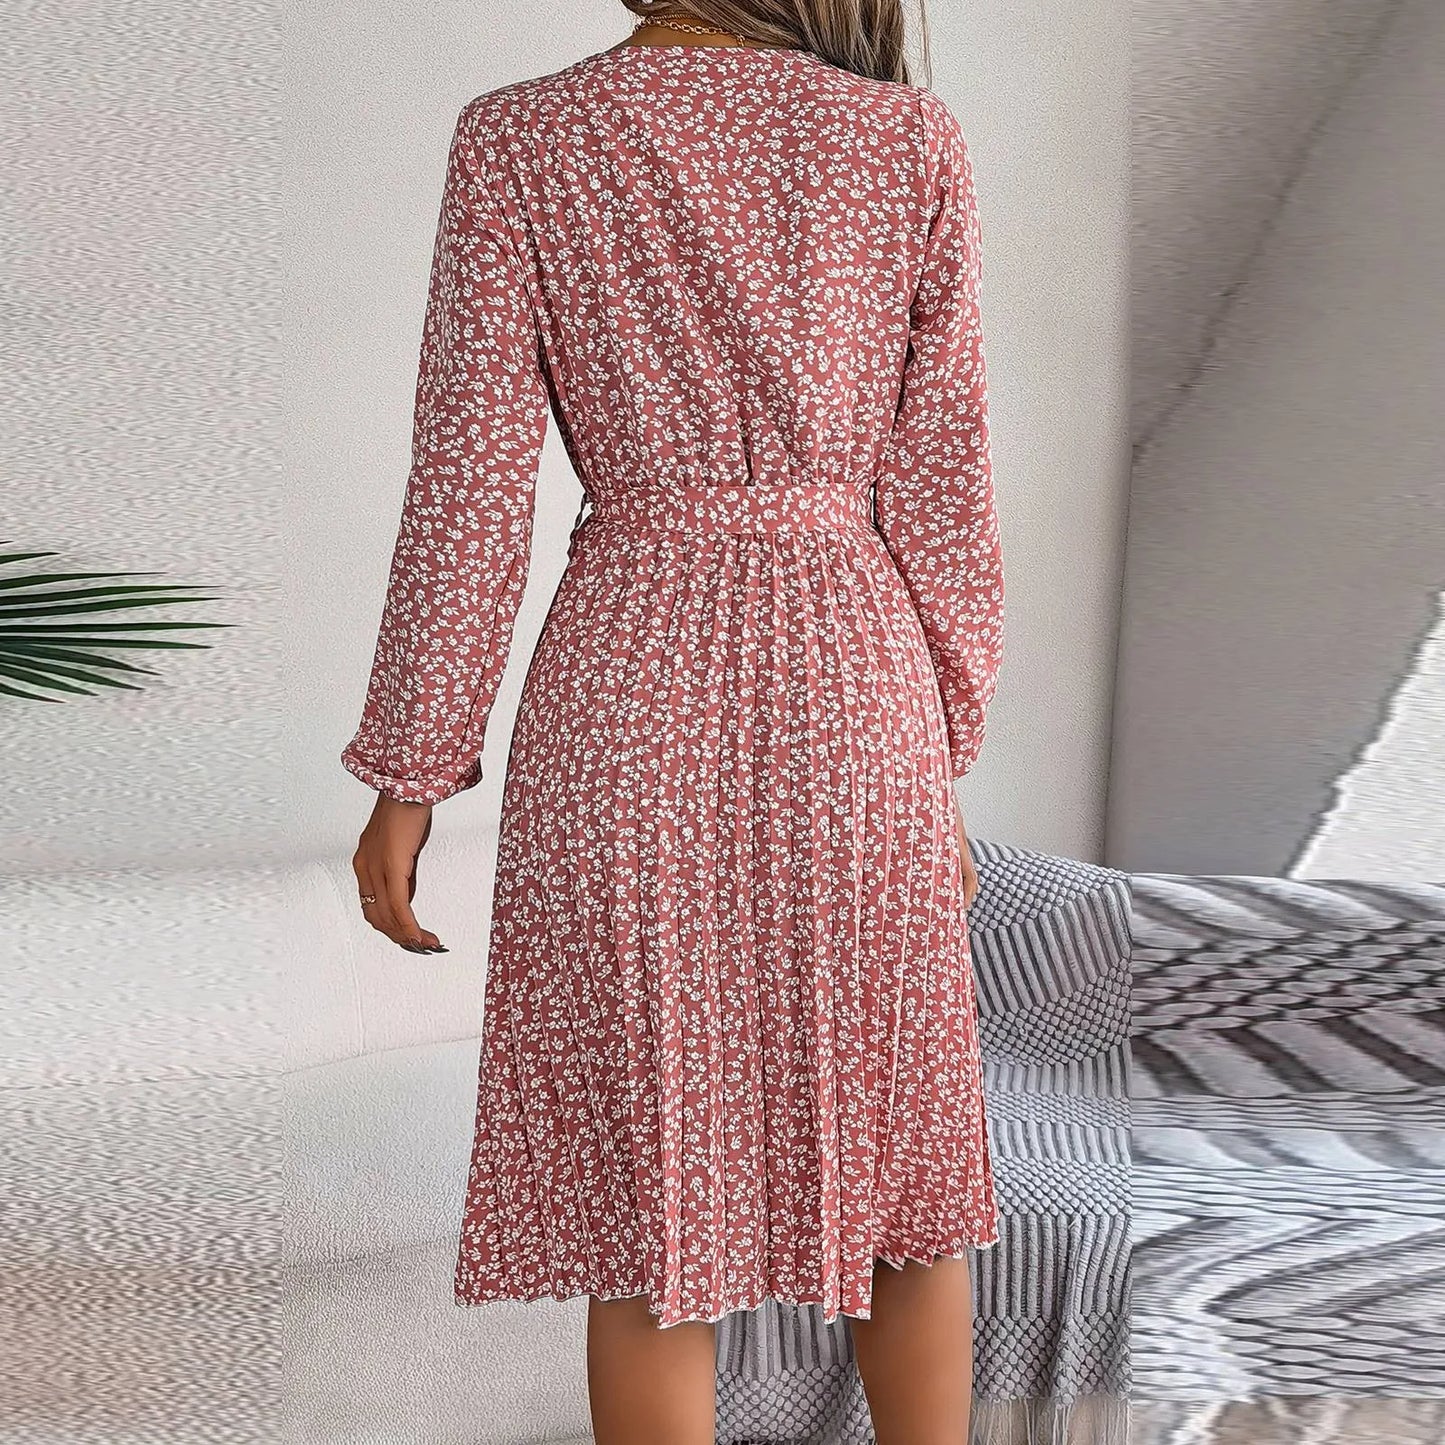 JuliaFashion - Women's Retro Floral Print Pleated Casual Long Sleeved Wide Hem Midi Elegant Round Neck Lace Up Casual Dress